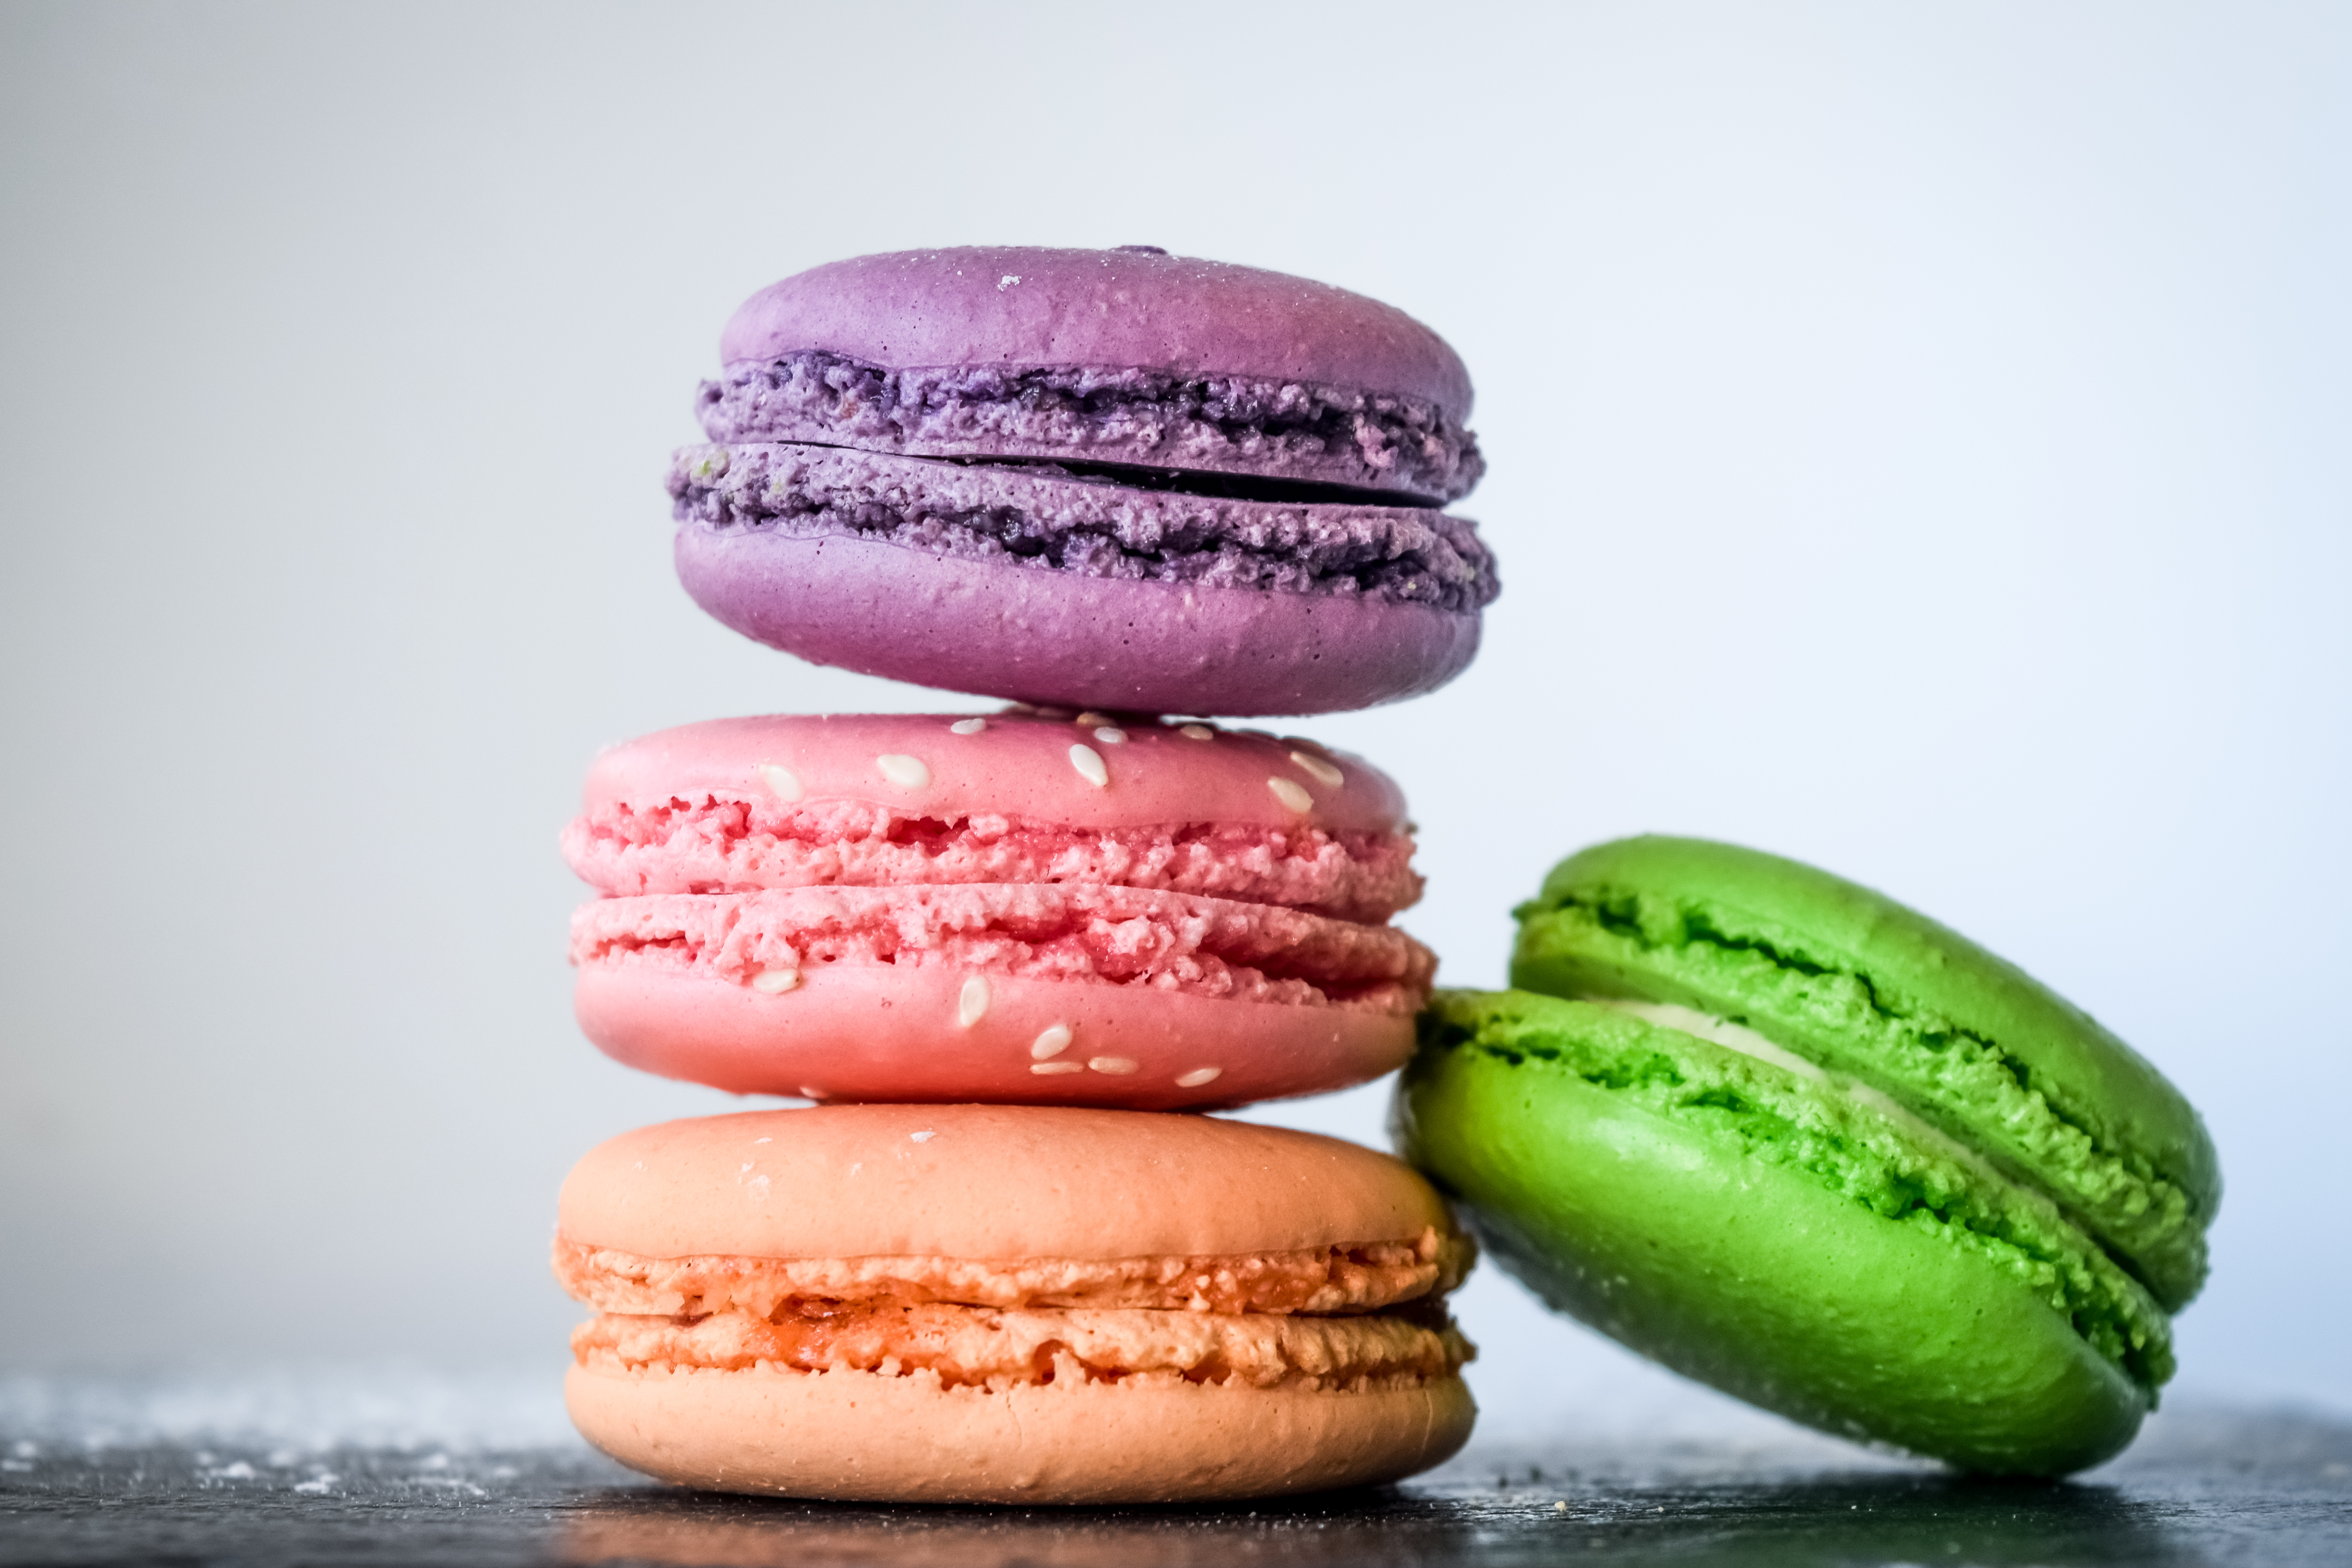 makaroons, food, multicolored, bakery products, baking, macaroons, macaroon wallpaper for mobile